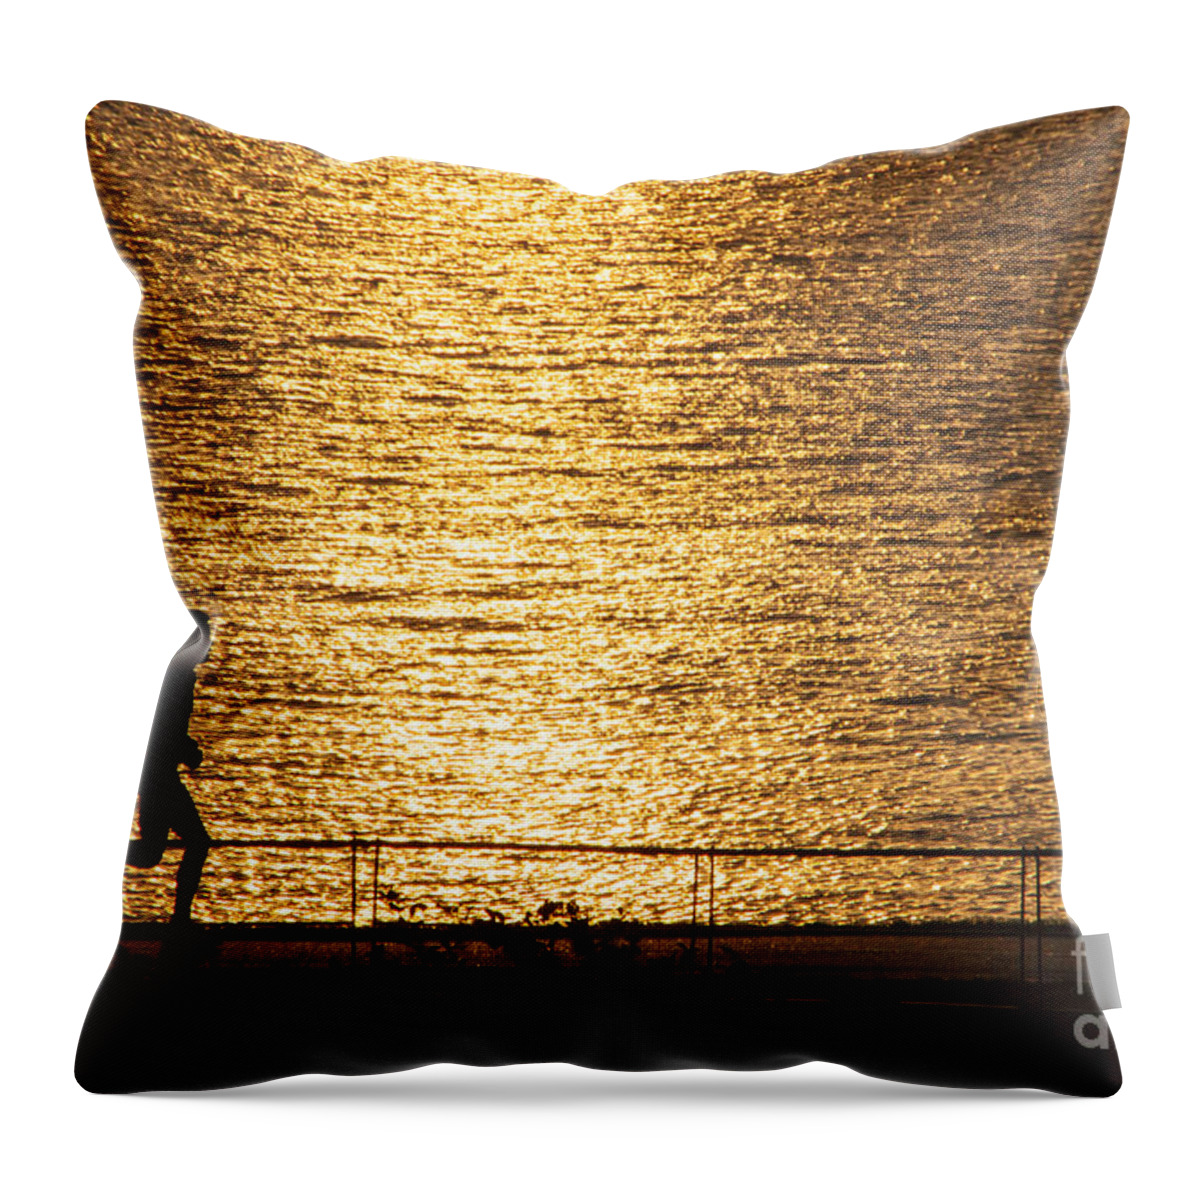 Sunrise Throw Pillow featuring the photograph Morning Jog by Inge Riis McDonald